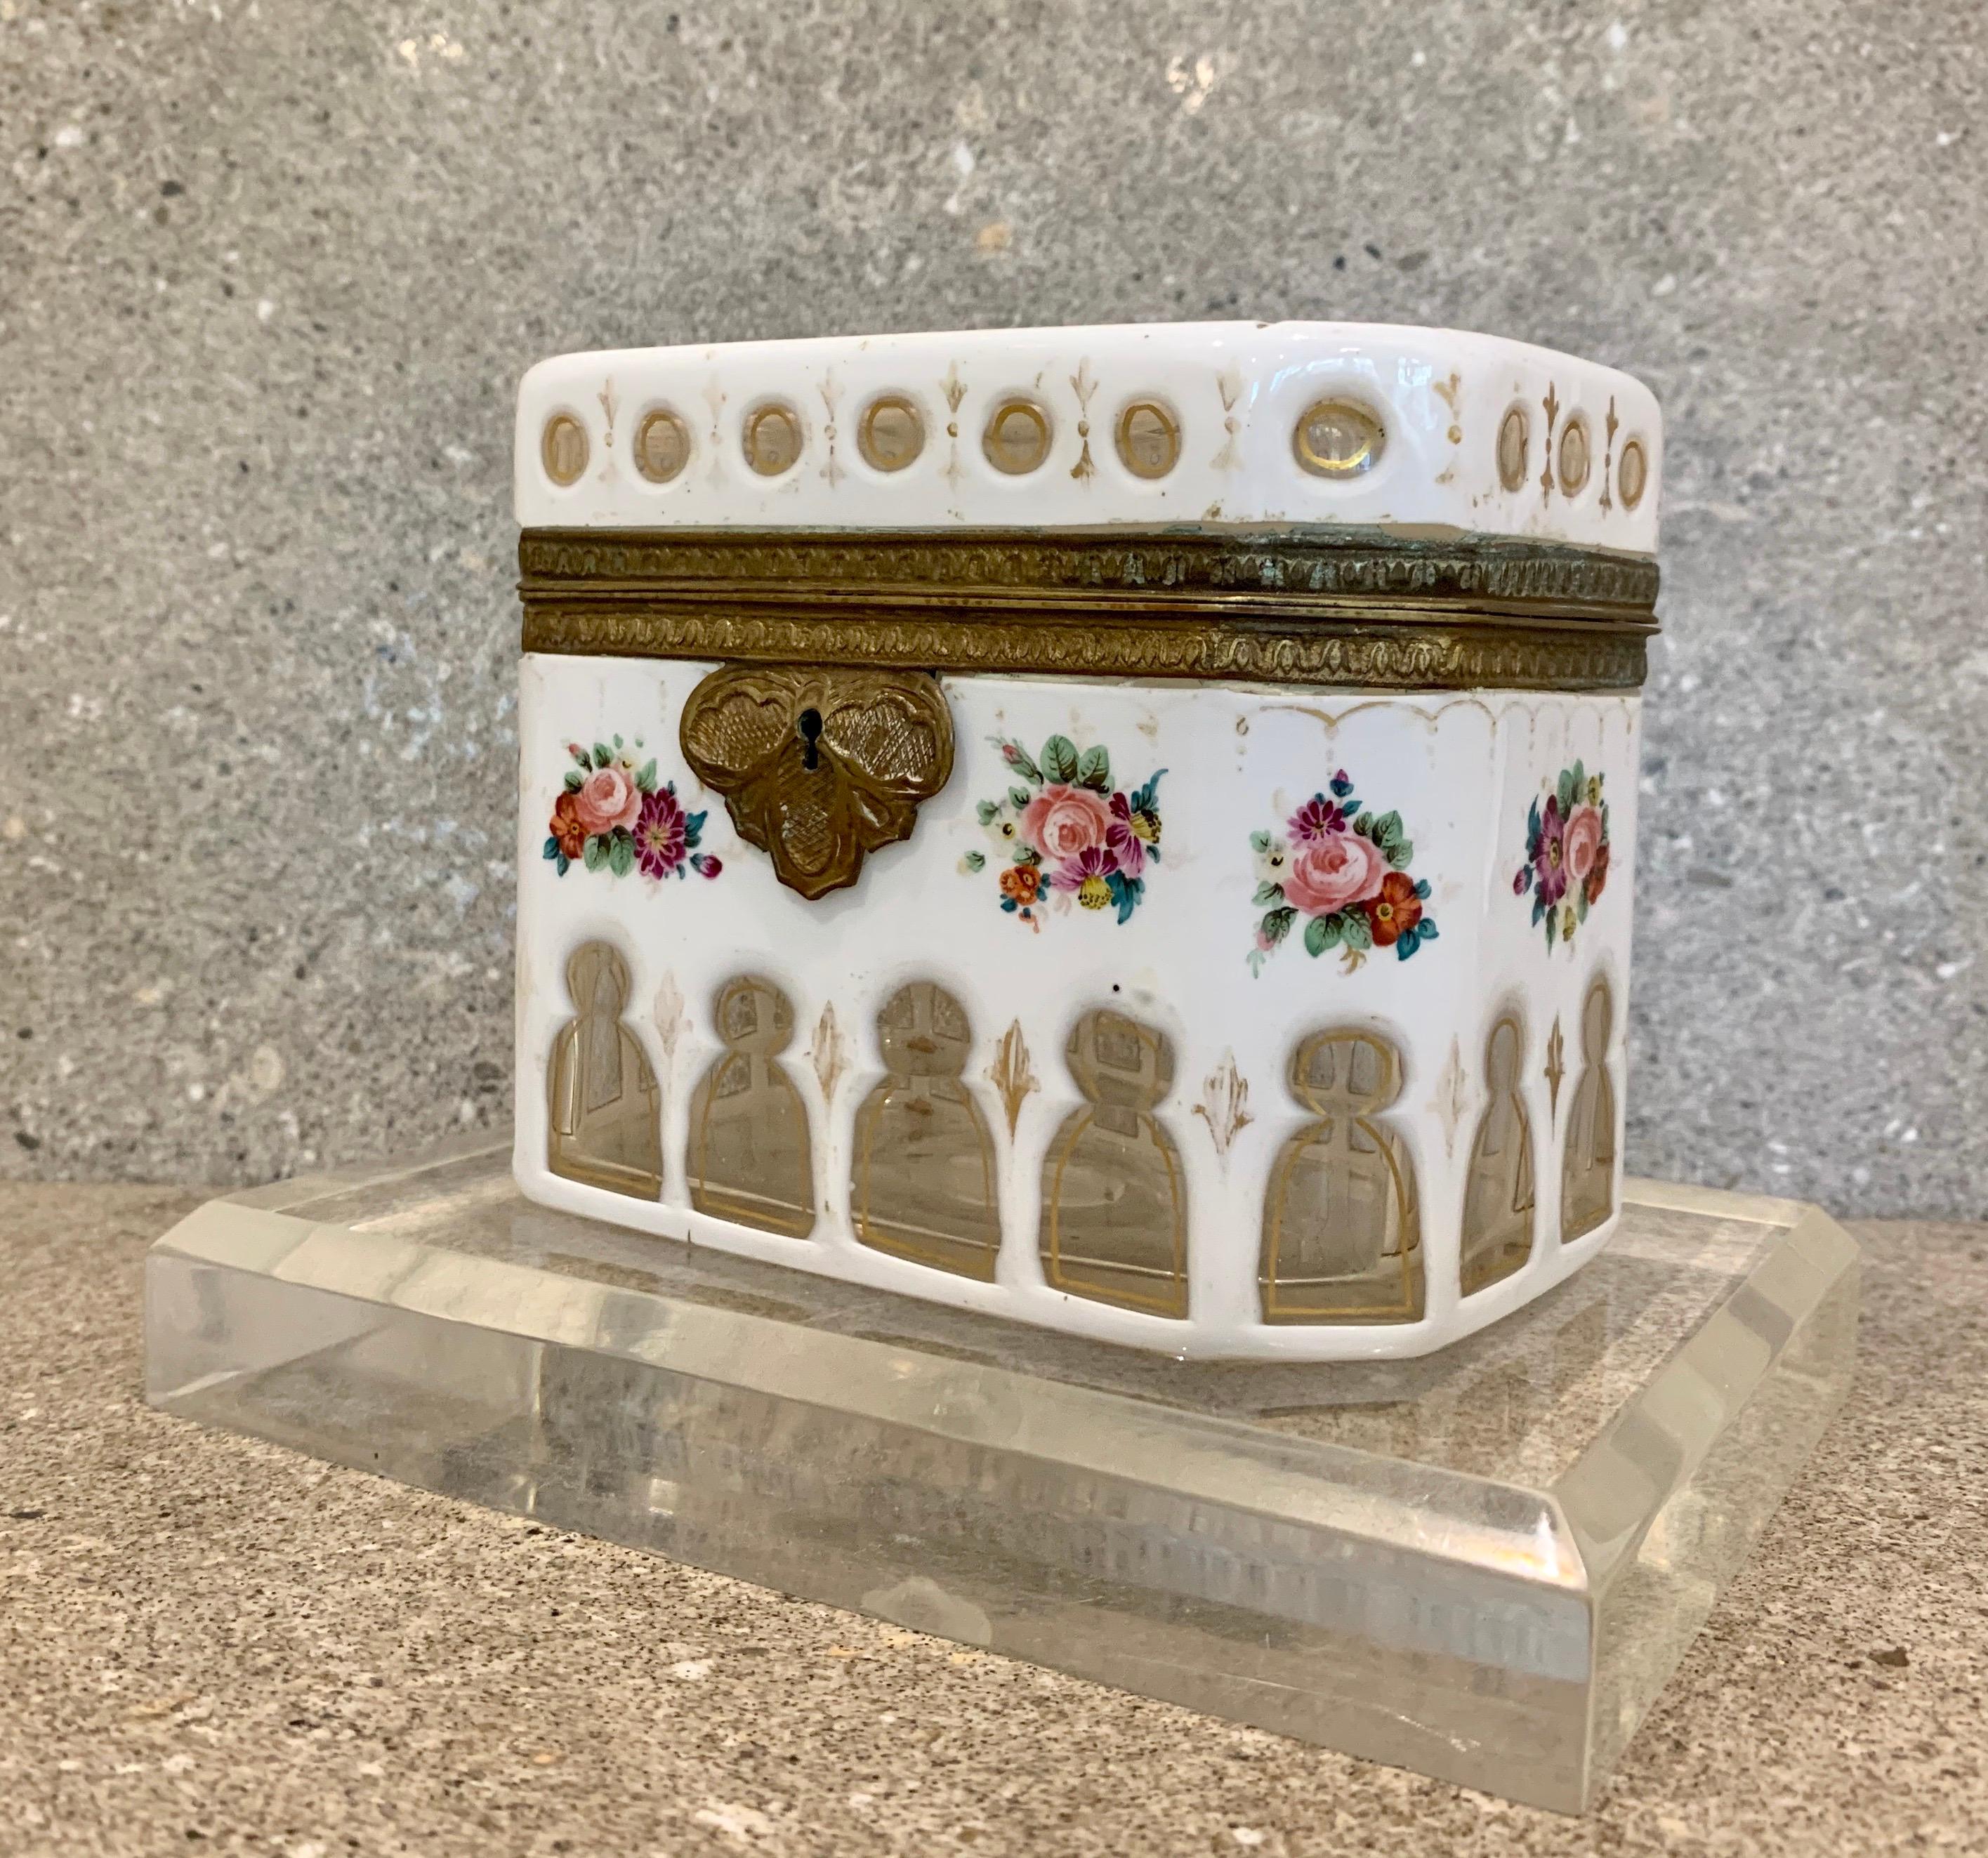 Made in Bohemia. A white overlay heavy high quality casket skilfully hand enamelled with
a floral decoration all over the top and sides. This box has a finely cast gilt
bronze escutcheon and mounts.
The measurements are 5.5 Inches Wide by 4.5